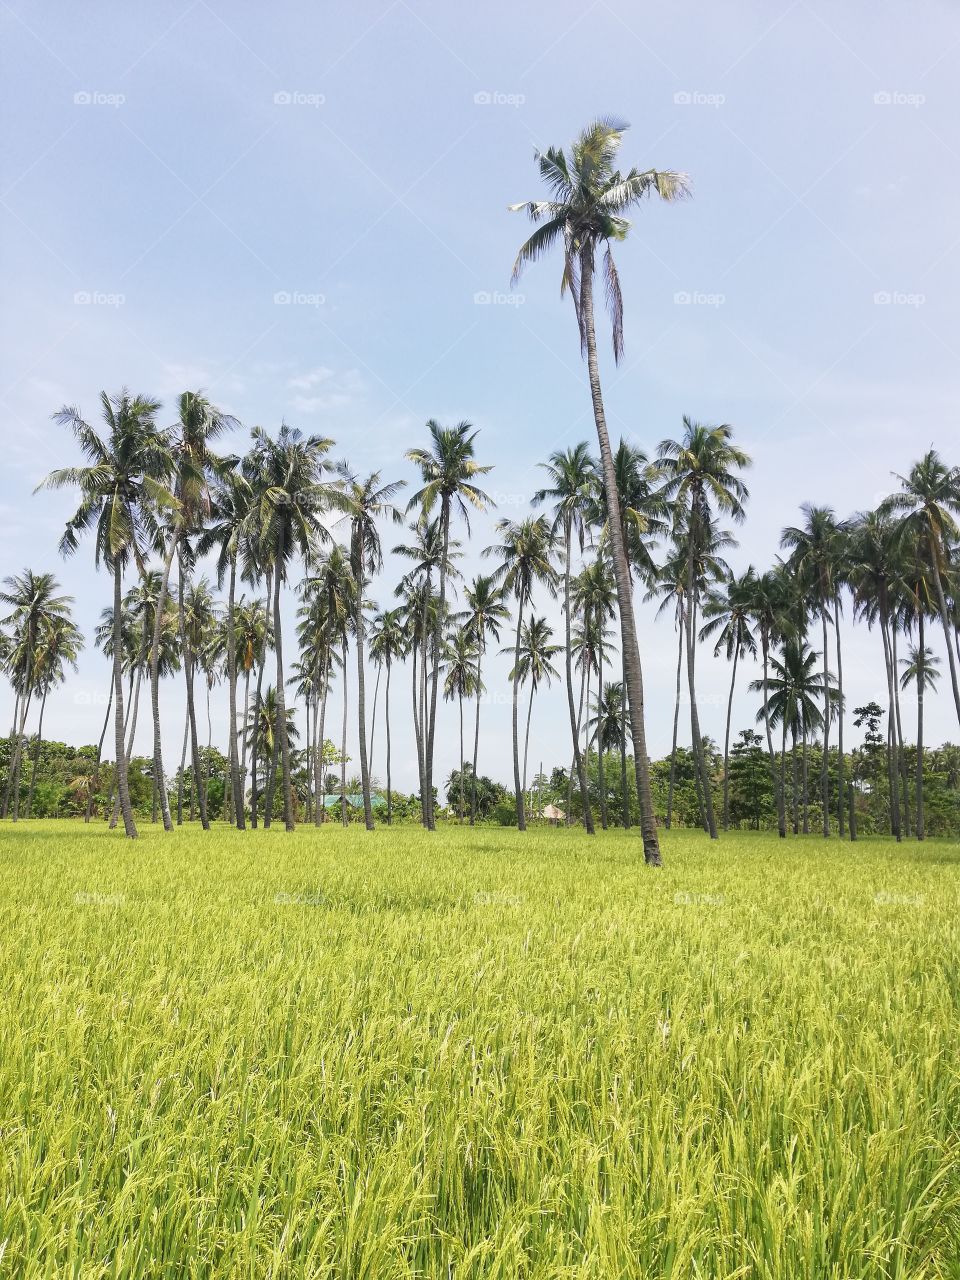 Tall coconut trees amidst a green luscious rice field in Abra De Ilog, Mindoro, Island of Philippines